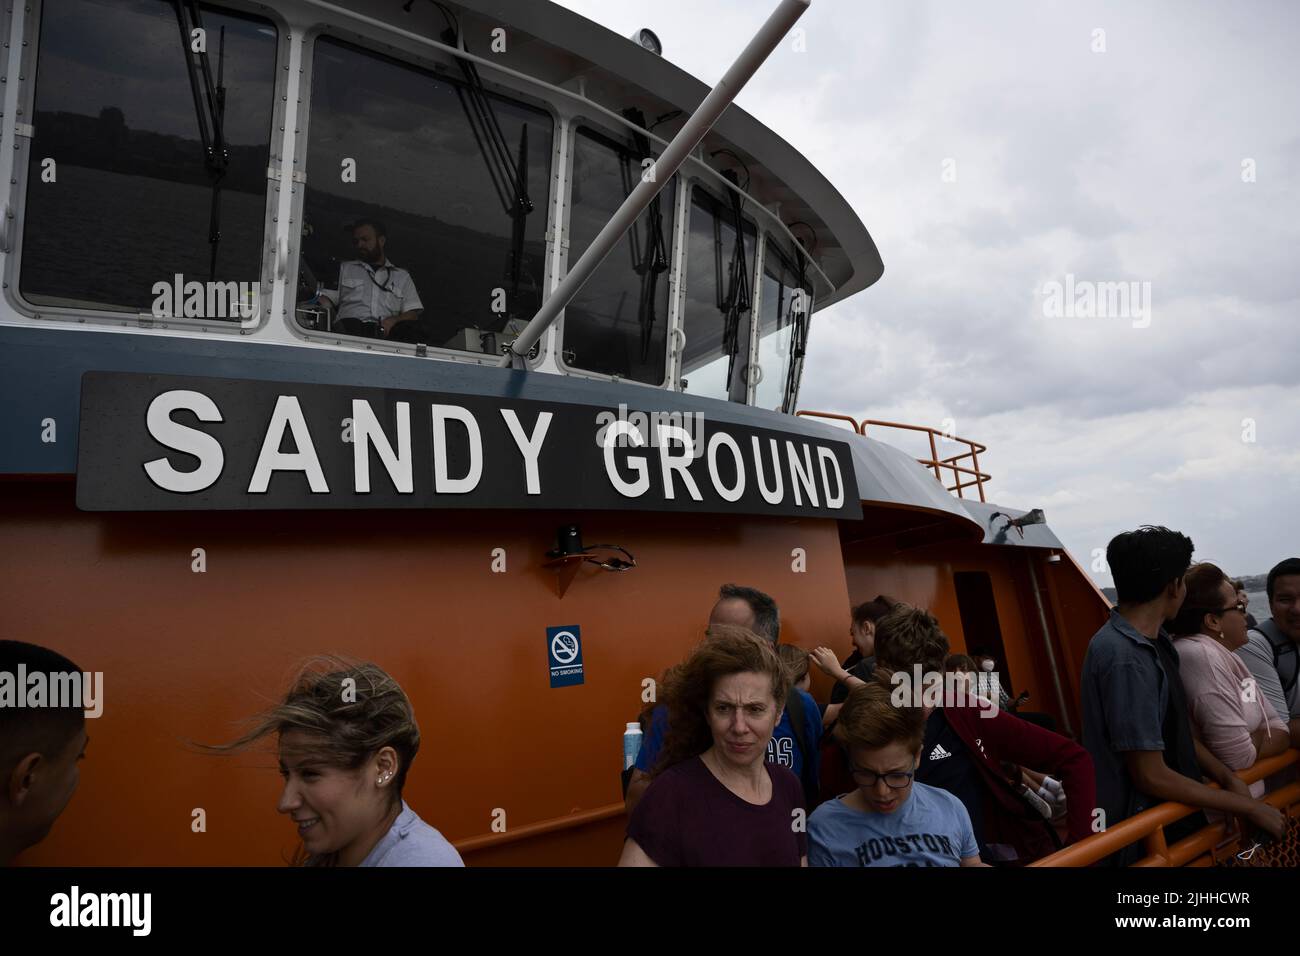 New York, US. 18 Jul 2022.  Passengers and pilot house of Sandy Ground Staten Island Ferry as it approaches Staten Island; NYC Department of Transportation annnounced reduced ferry schedule citing rise in COVID-19 cases; DOT says the modified schedule will be in effect through July 26.   New York City’s Health Department says 7-day average number of cases has doubled since April. Stock Photo